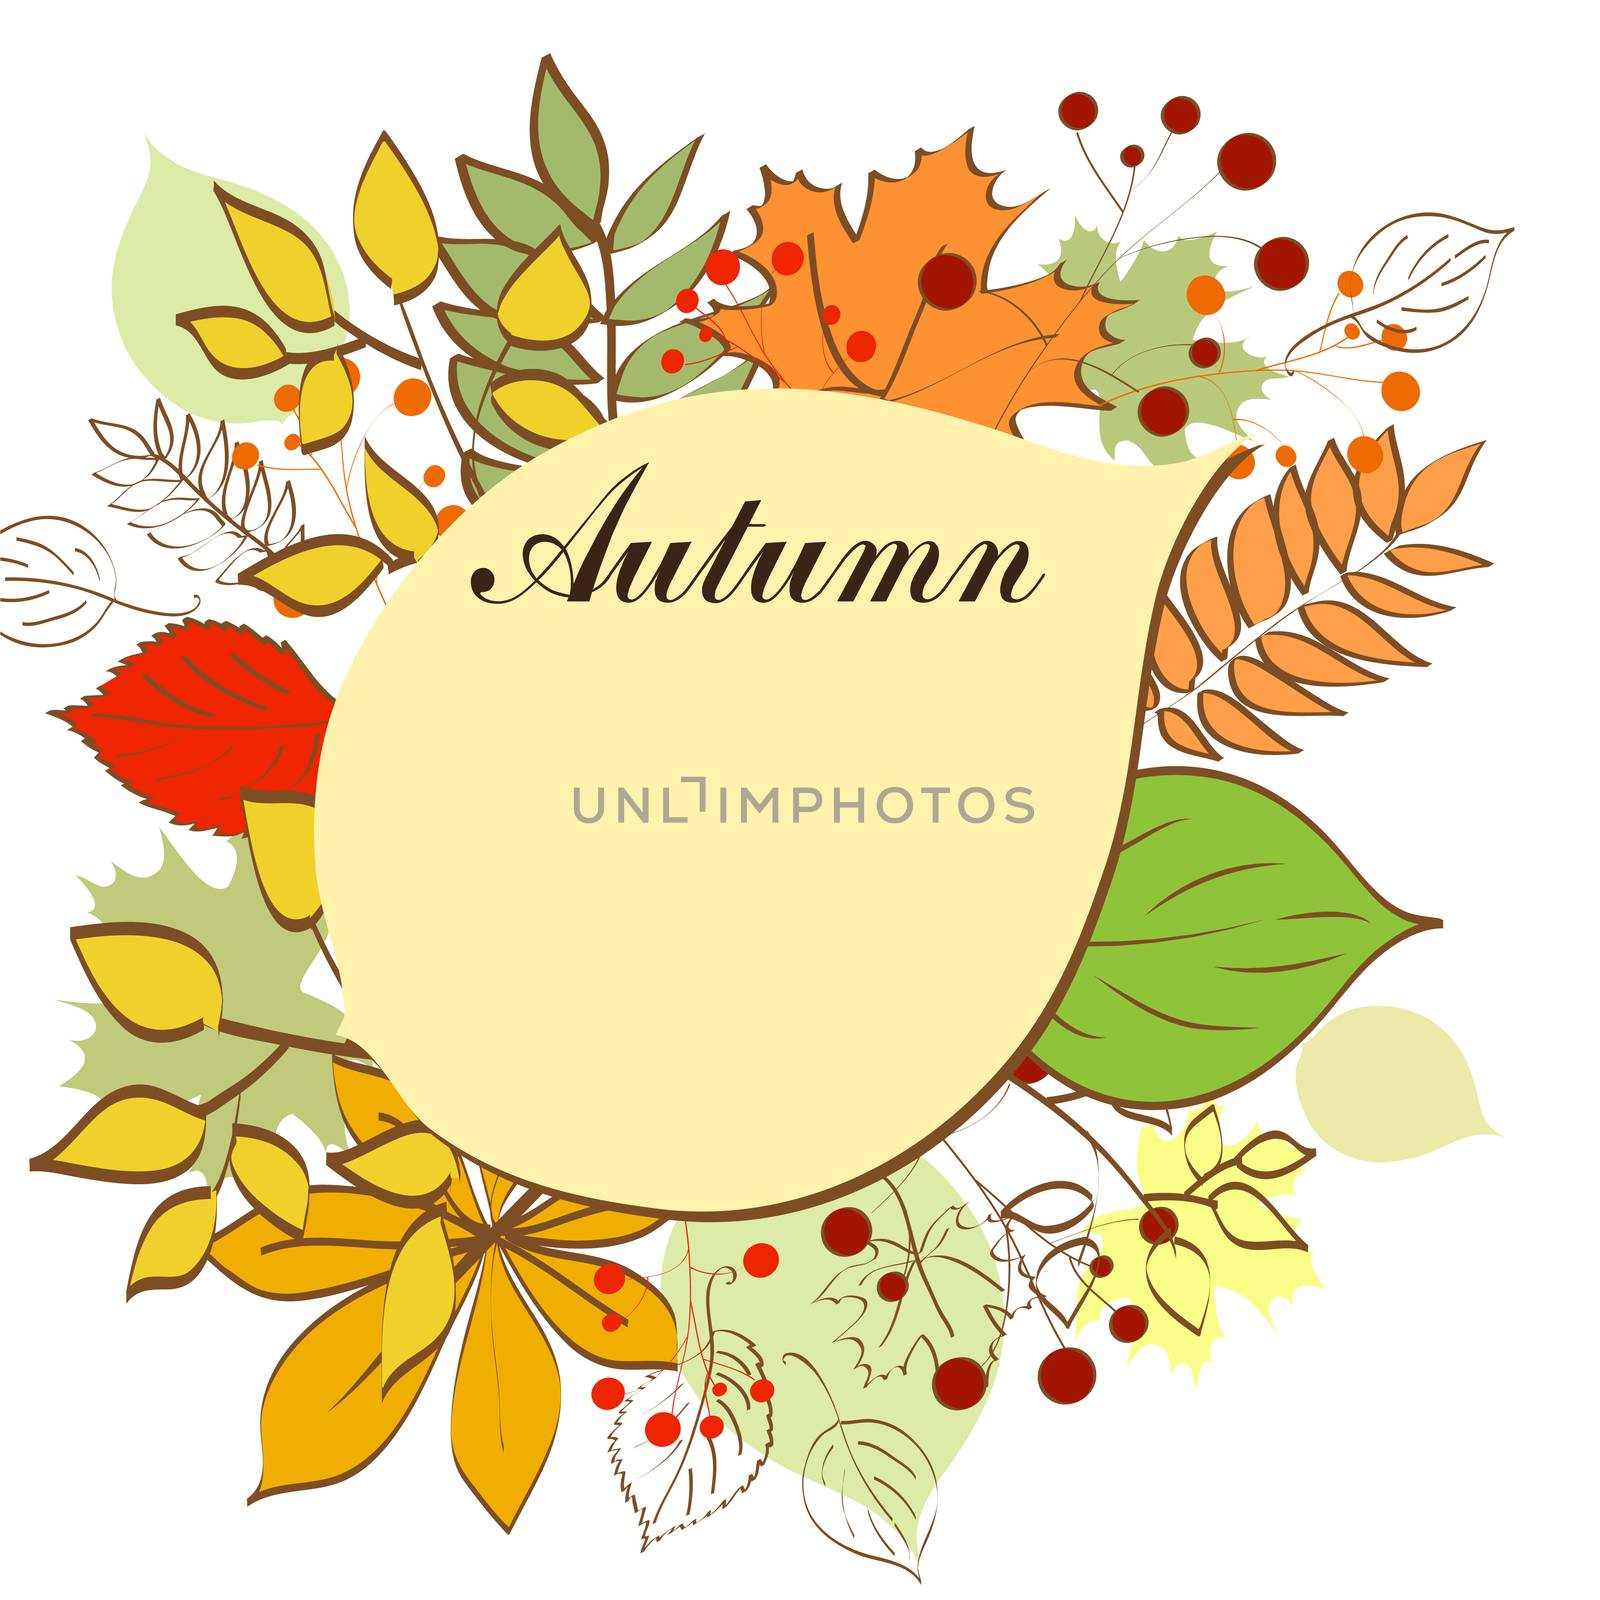 Autumn bright background with yellow leaves and place for your place. Autumn mood. by Adamchuk